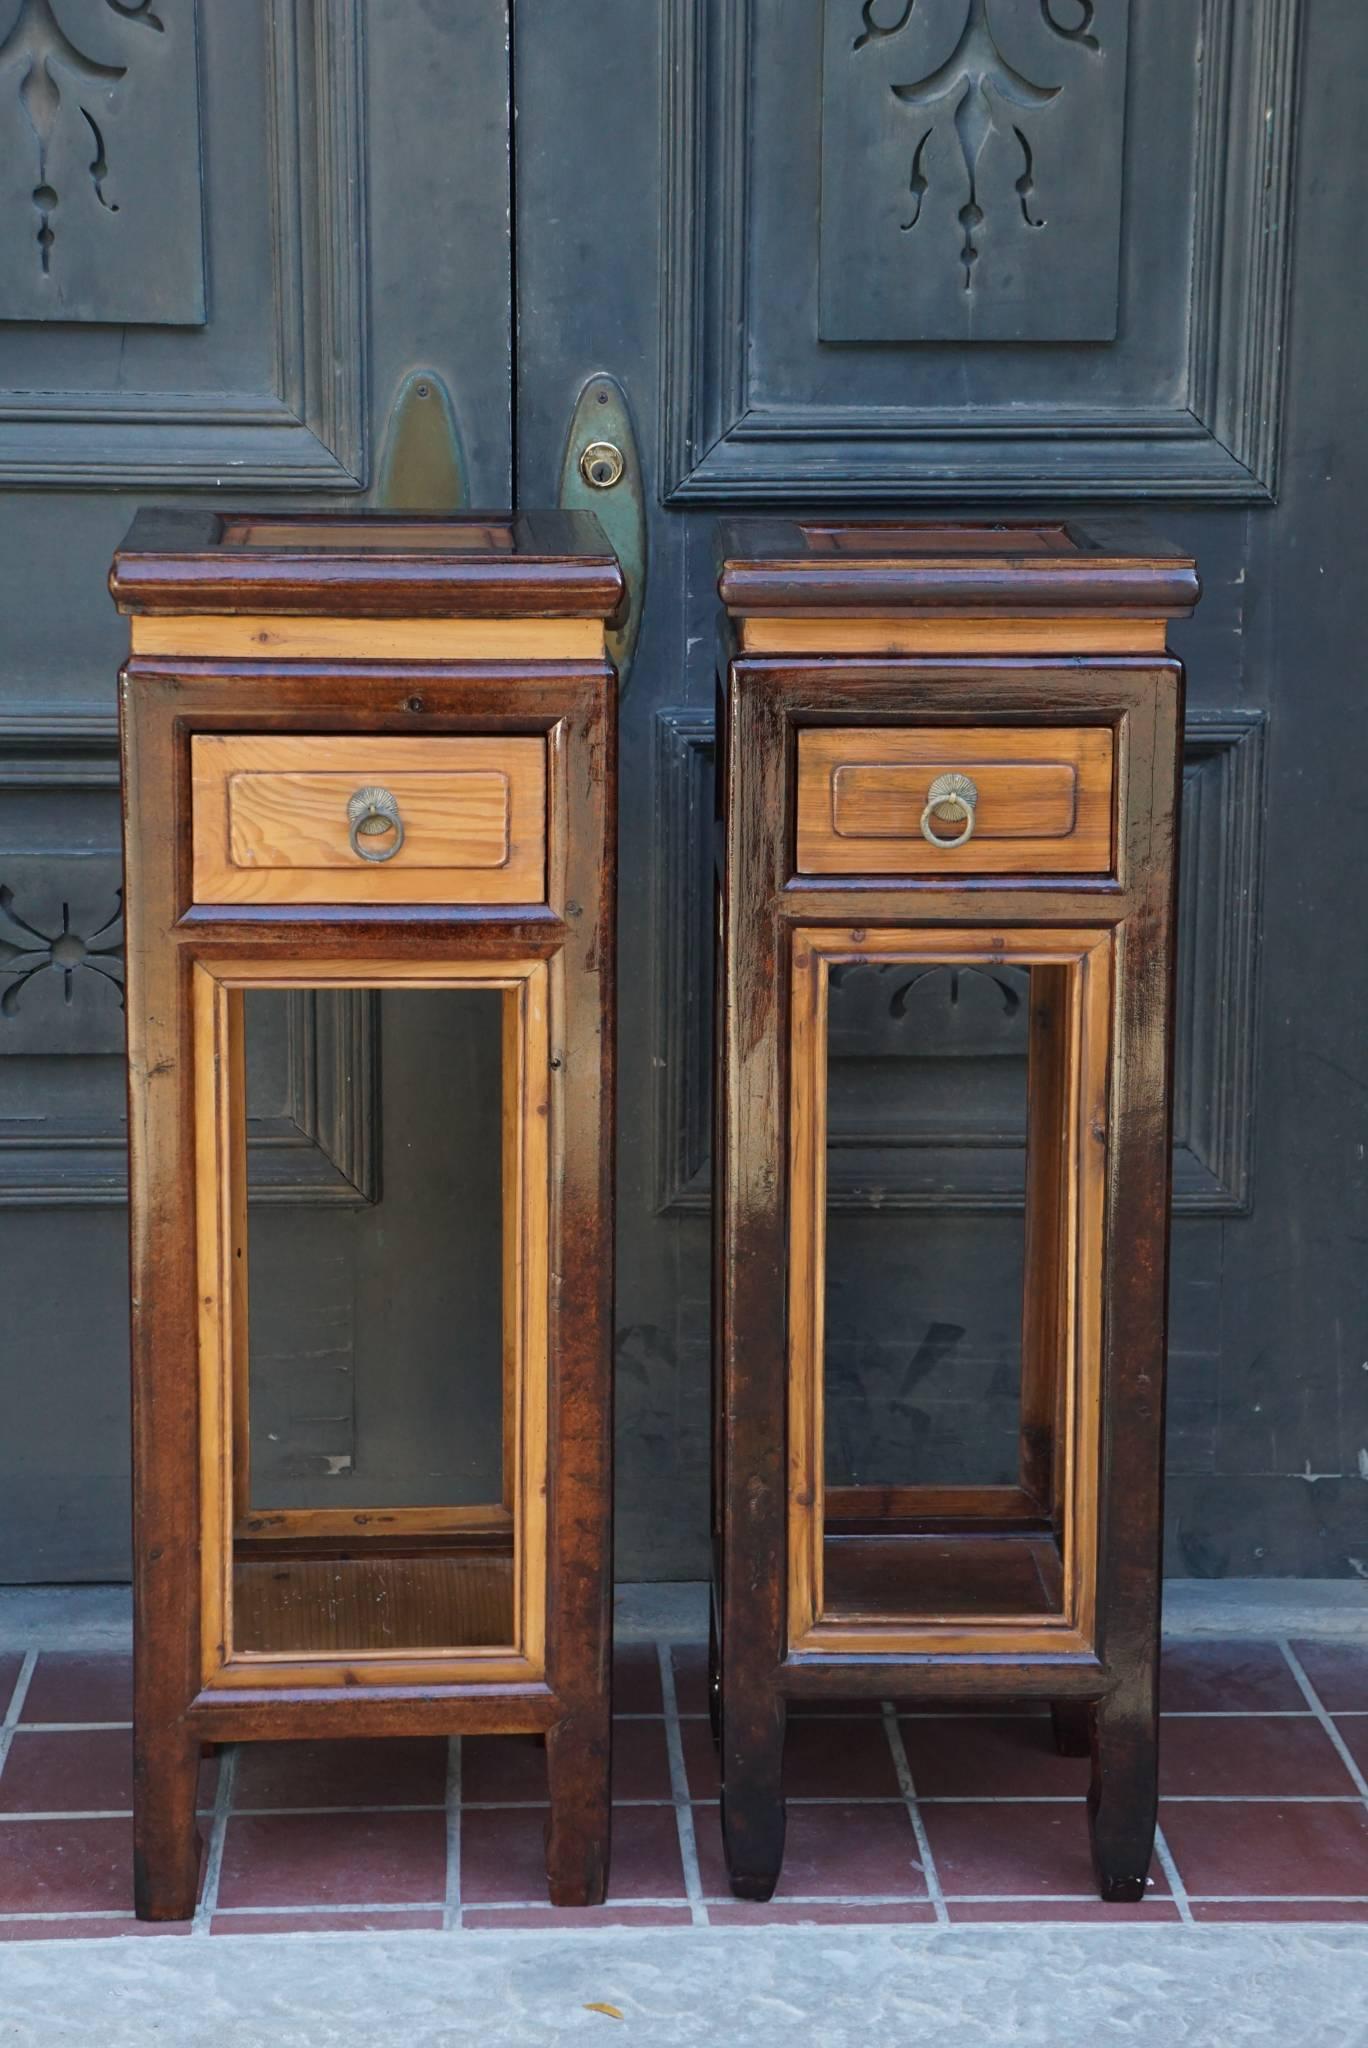 This pair of Chinese provincial elm stands, circa 1890-1900. Probably at one time completely covered in lacquer the wood has been exposed in areas creating an interesting contrast of surfaces. They are made with a single drawer and can be used as